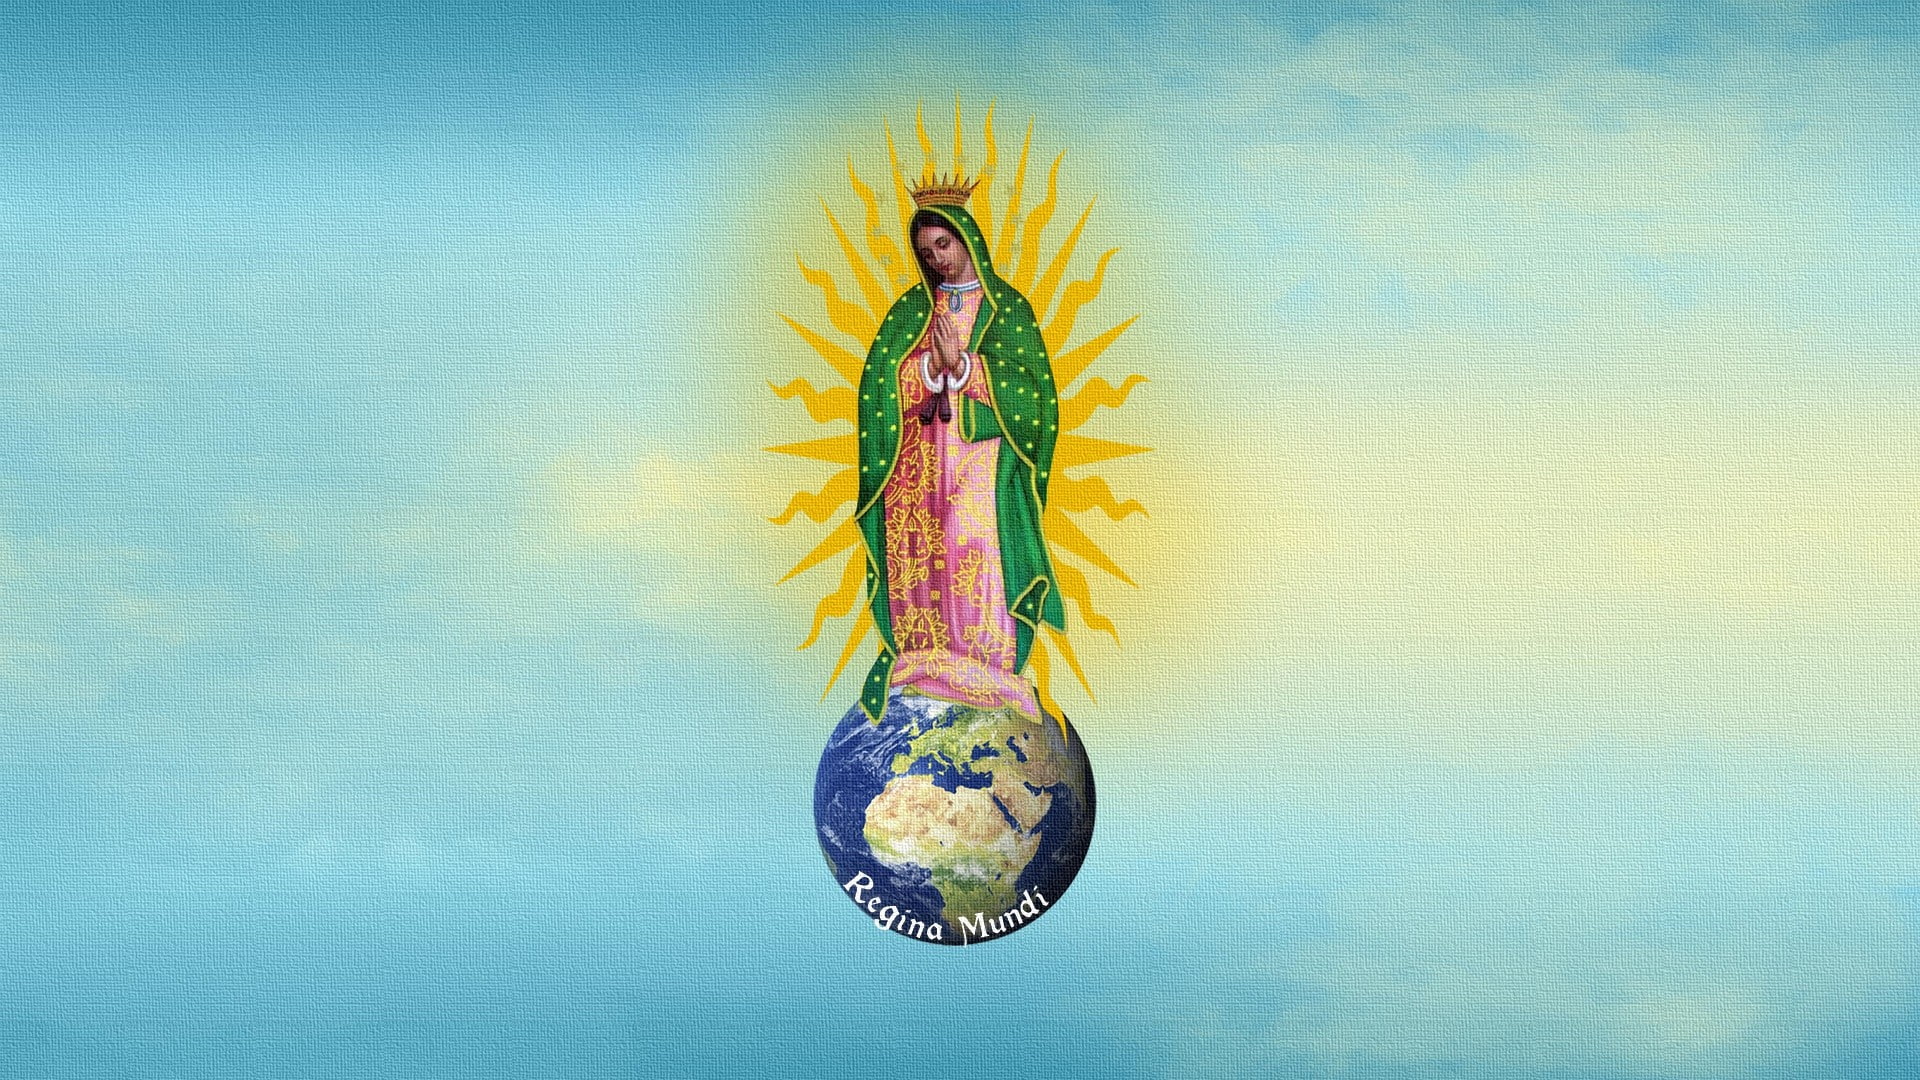 Christianity, clouds, Earth, painting, Virgin Mary